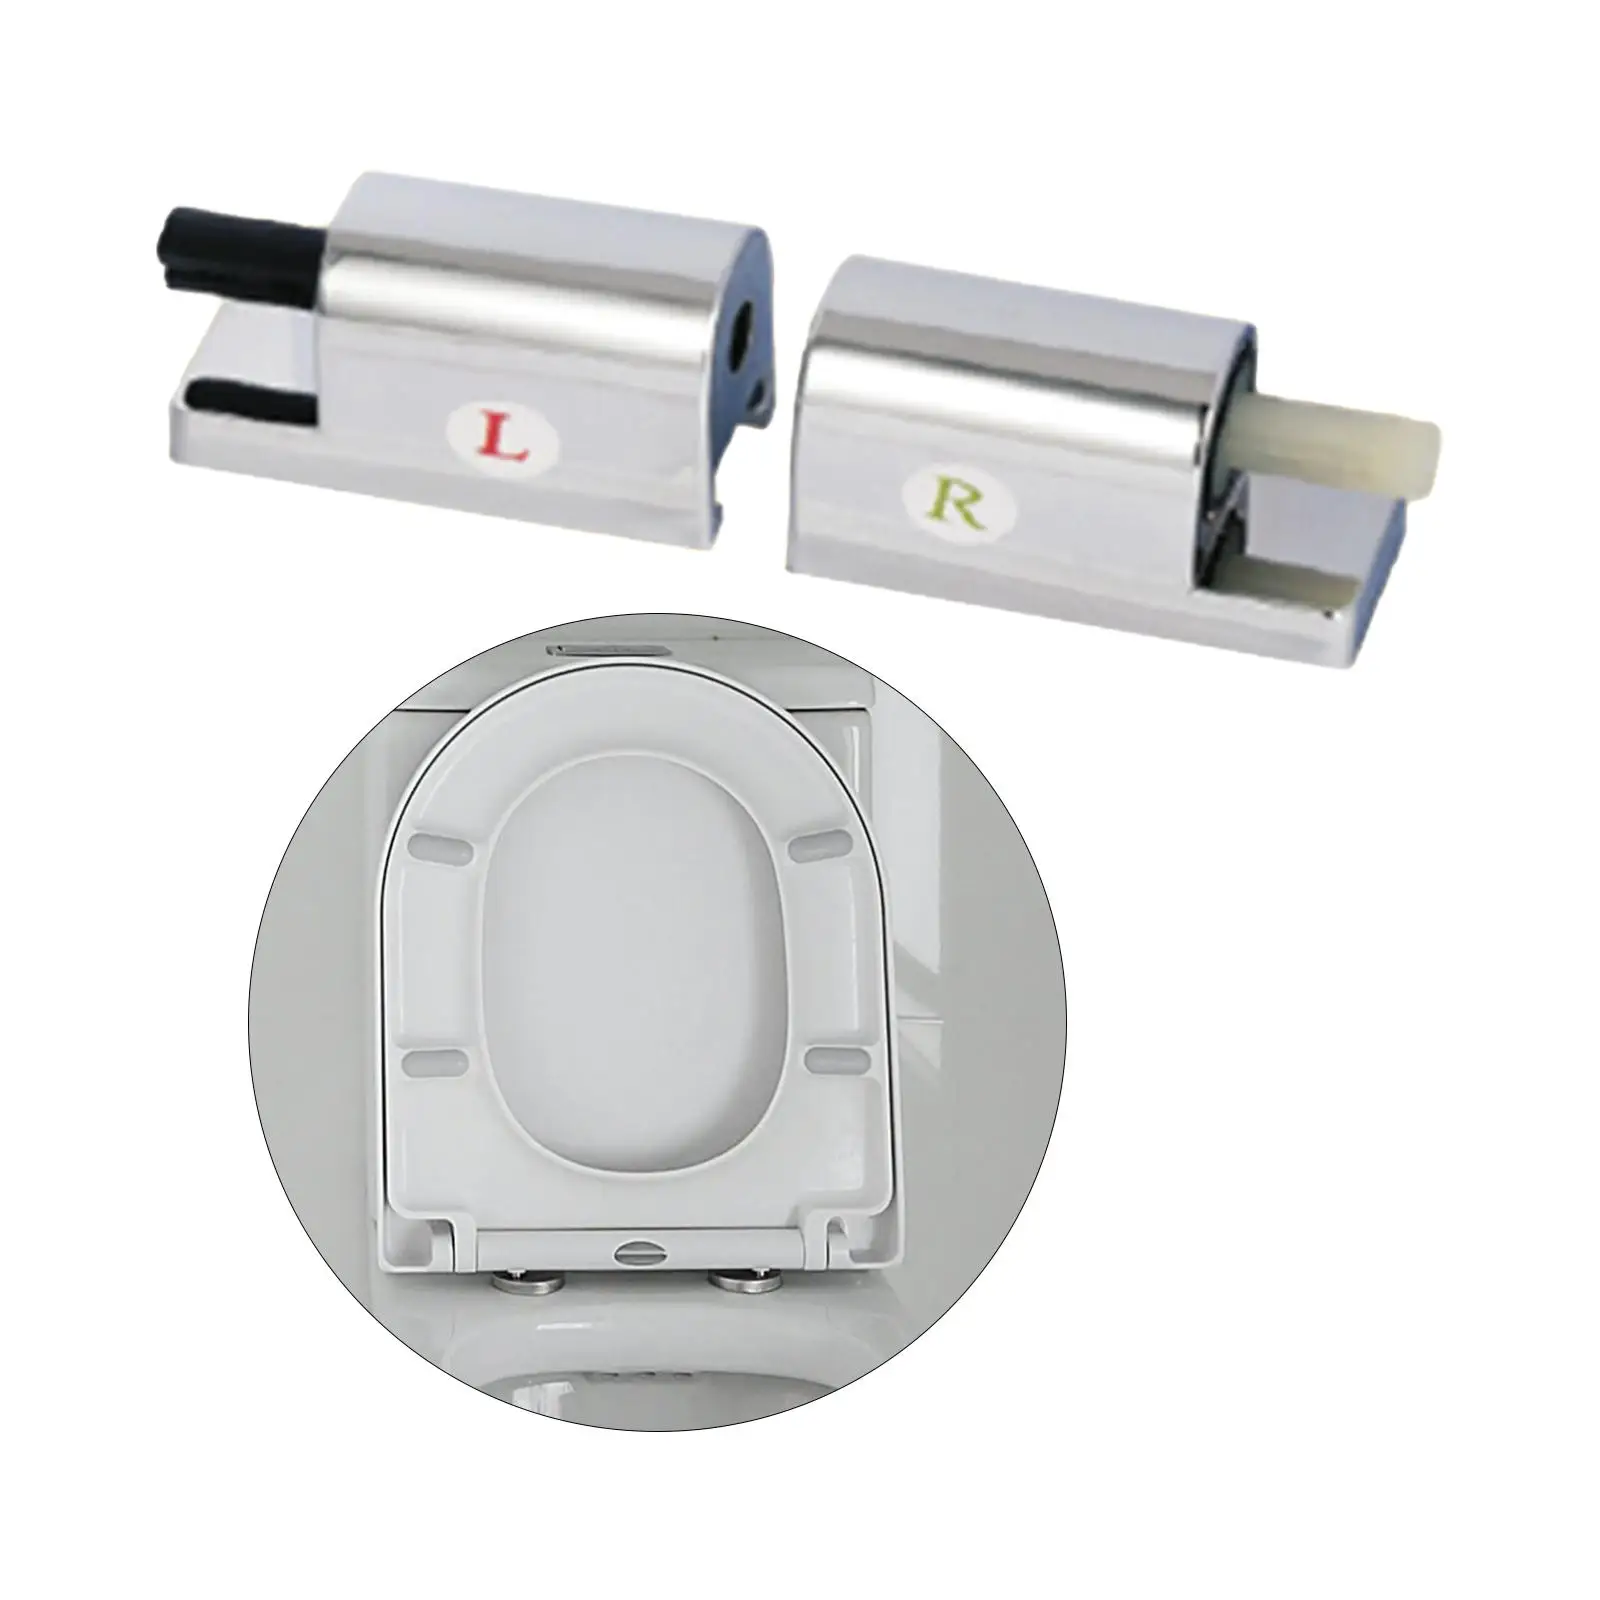 2 Pieces Toilet Seat Hinge Mounting Fixed Joint Easy Installation Fittings